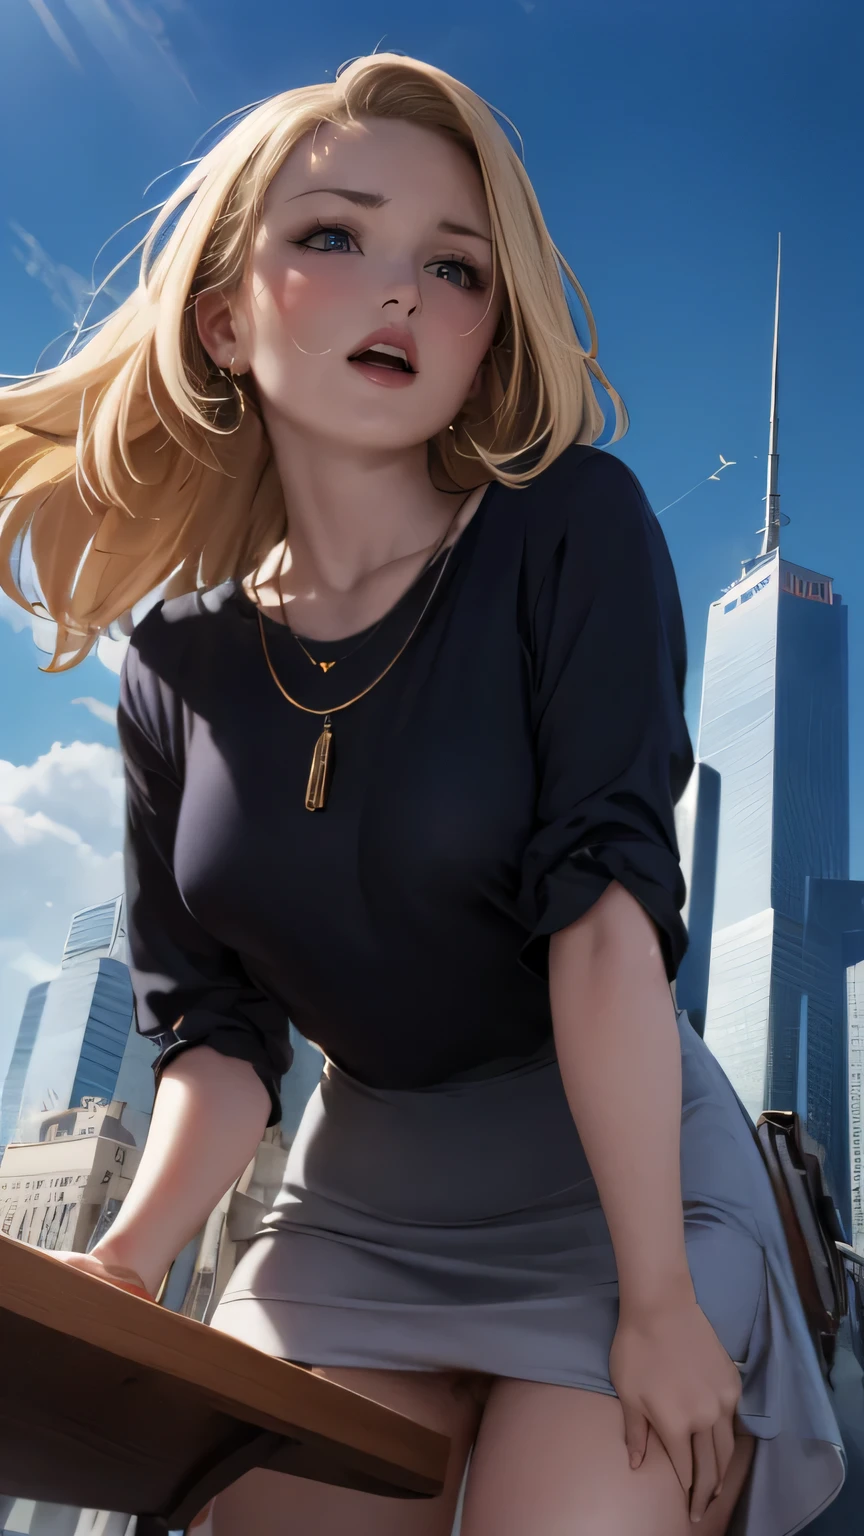 high-definition images, atmospheric perspective, 8k, super detail, accurate, best quality, a westerner woman, ecstasy face, ((drooping eyes, round face, realistic skin)), (blush), (((show off the dark pubic hair))), ((light colored casual dress)), earrings, necklace, thick blond braid hair, ((small park, fountain, skyscrapers, strong sunlight)), (((rubbing pubic against table corner by climbing))), angle from below,